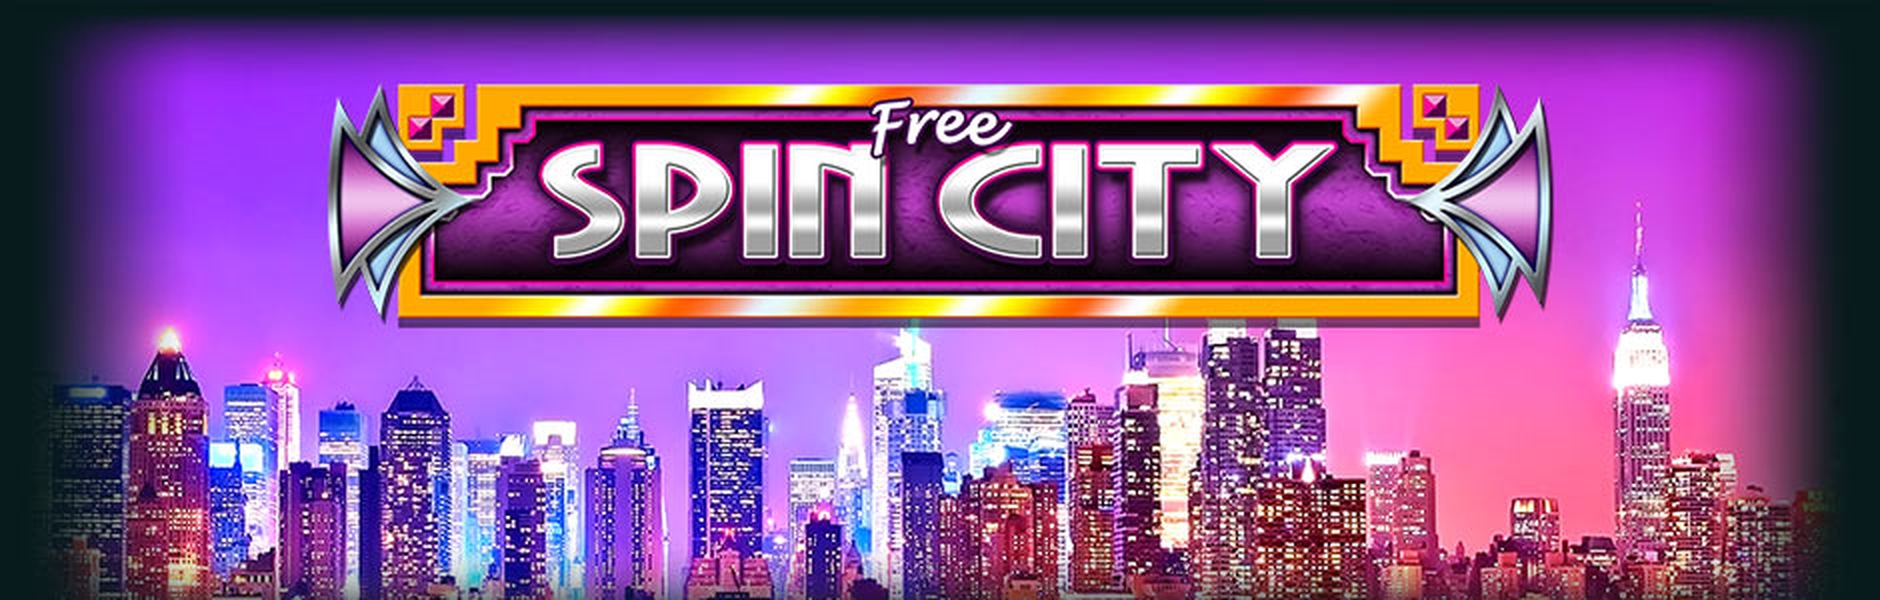 Free Spin City demo